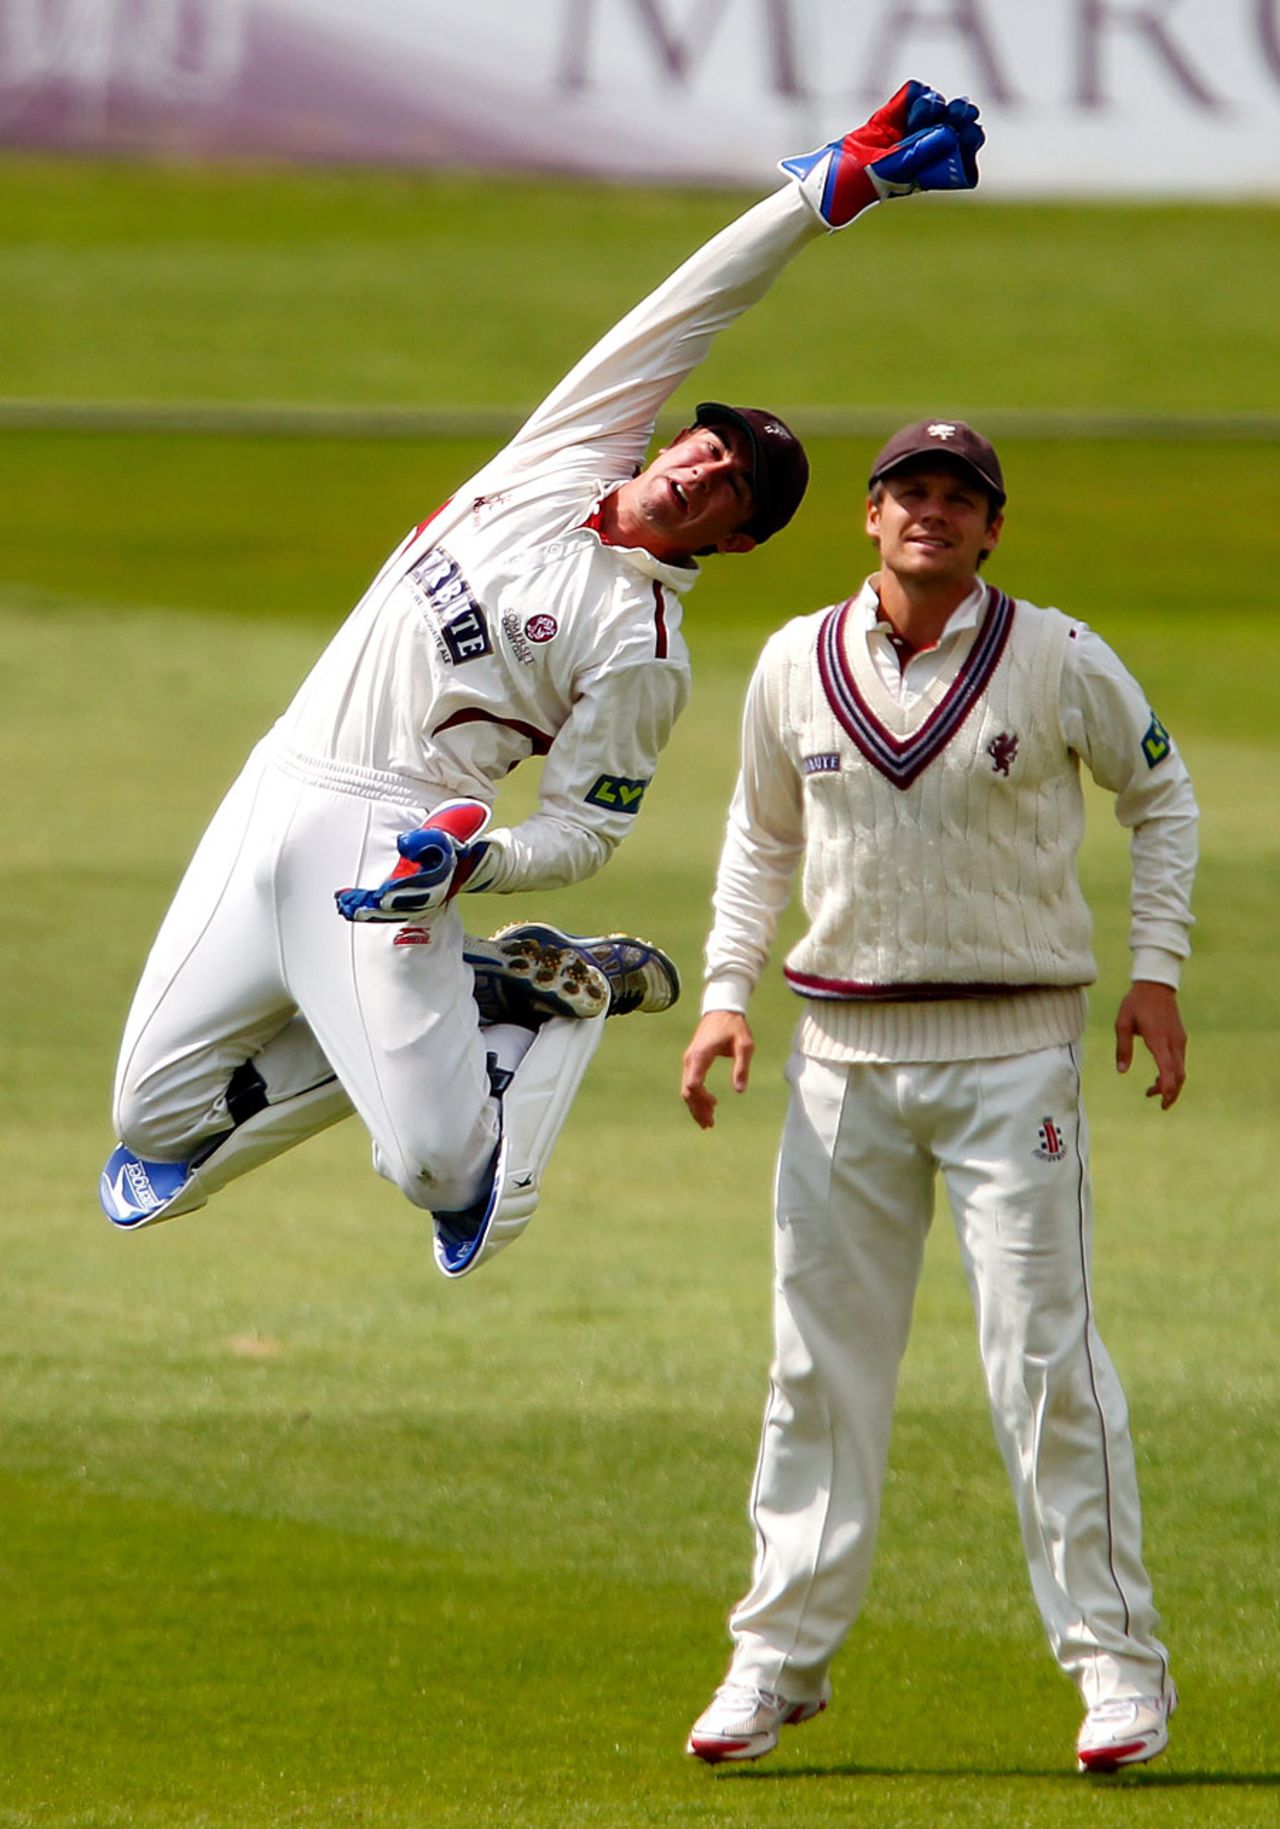 Alex Barrow leaps for a take, Derbyshire v Somerset, County Championship, Division One, Derby, 1st day, June 21, 2013